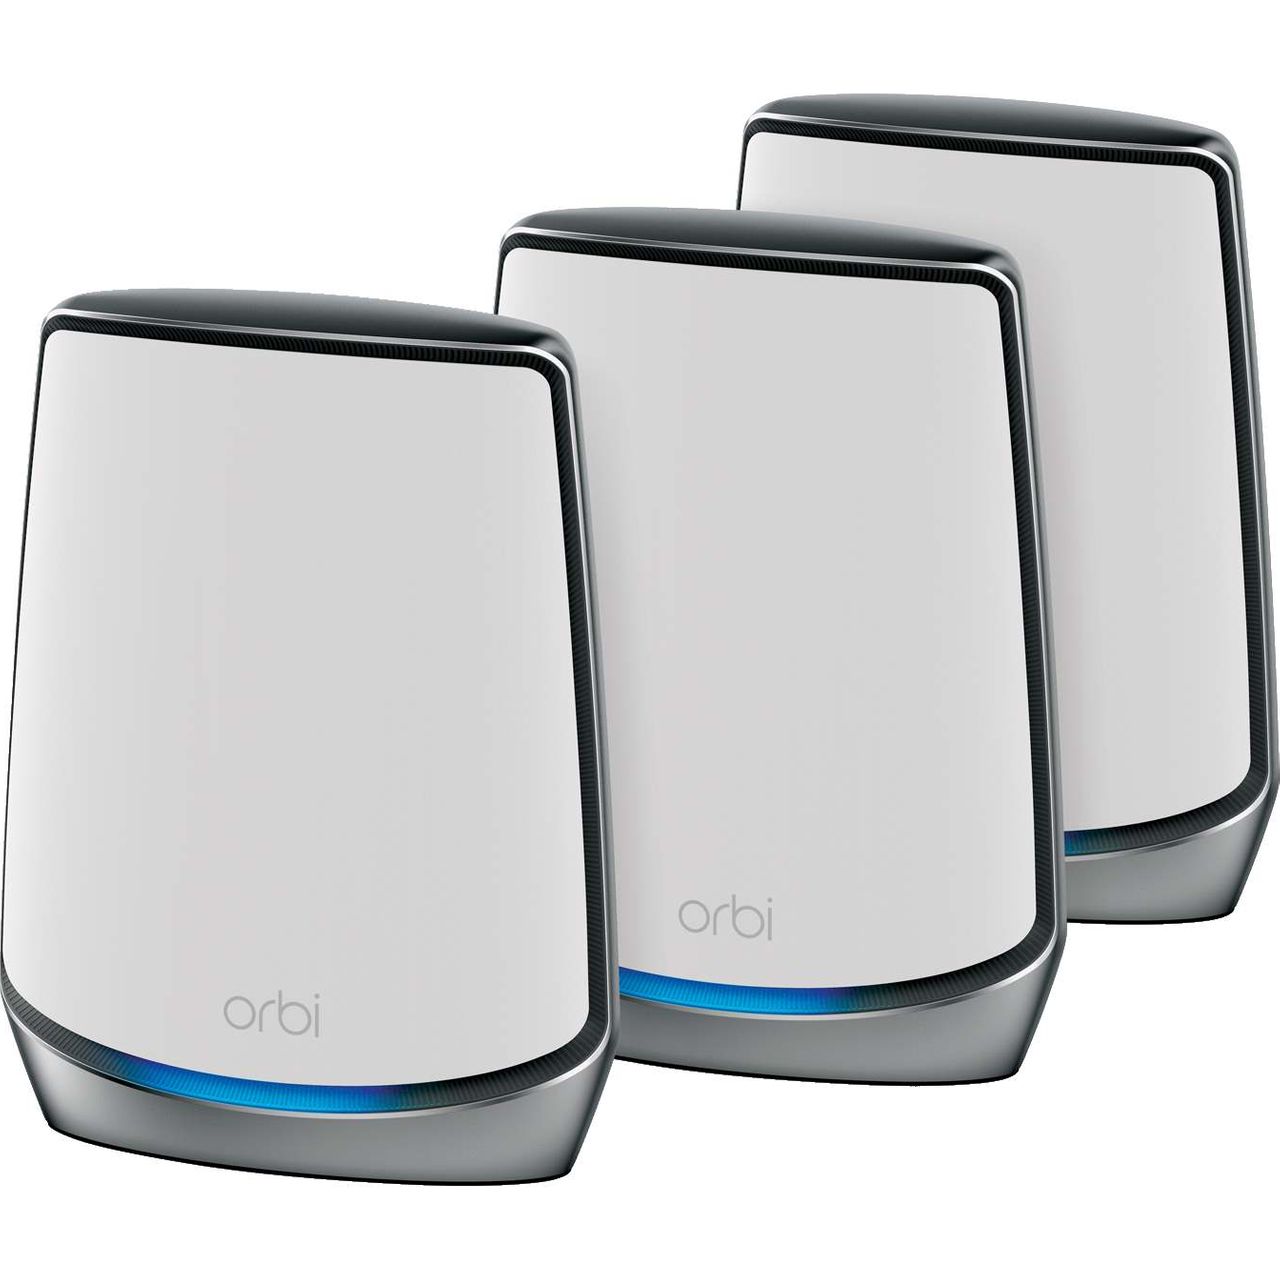 Netgear Orbi Whole Home Tri Band WiFI 6 System Review